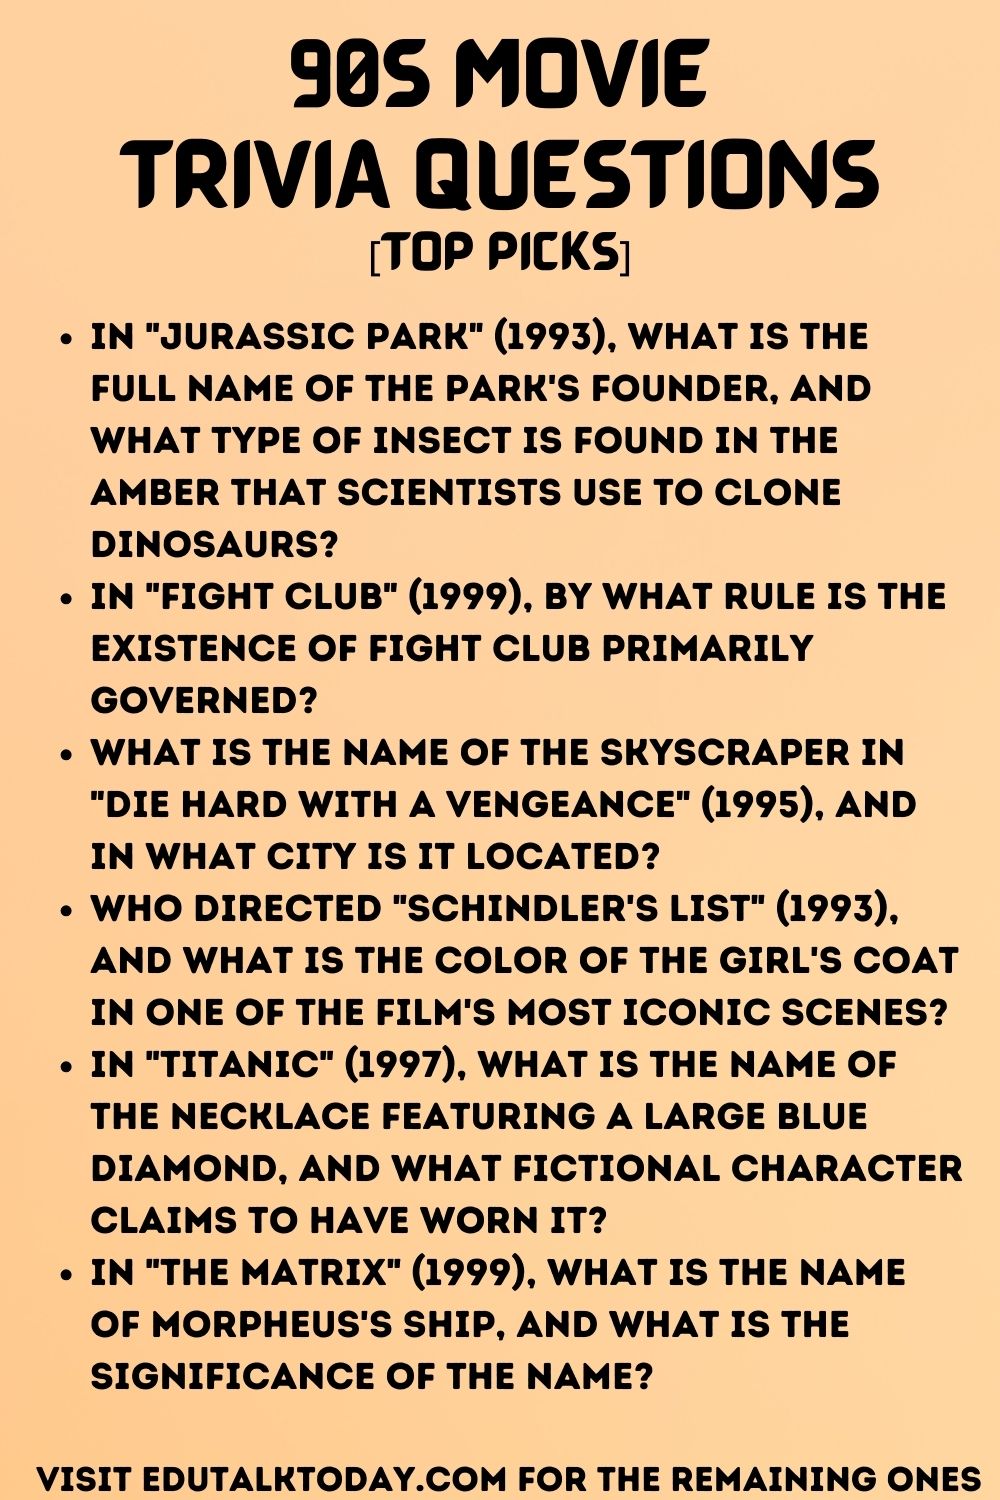 90s Movie Trivia Questions